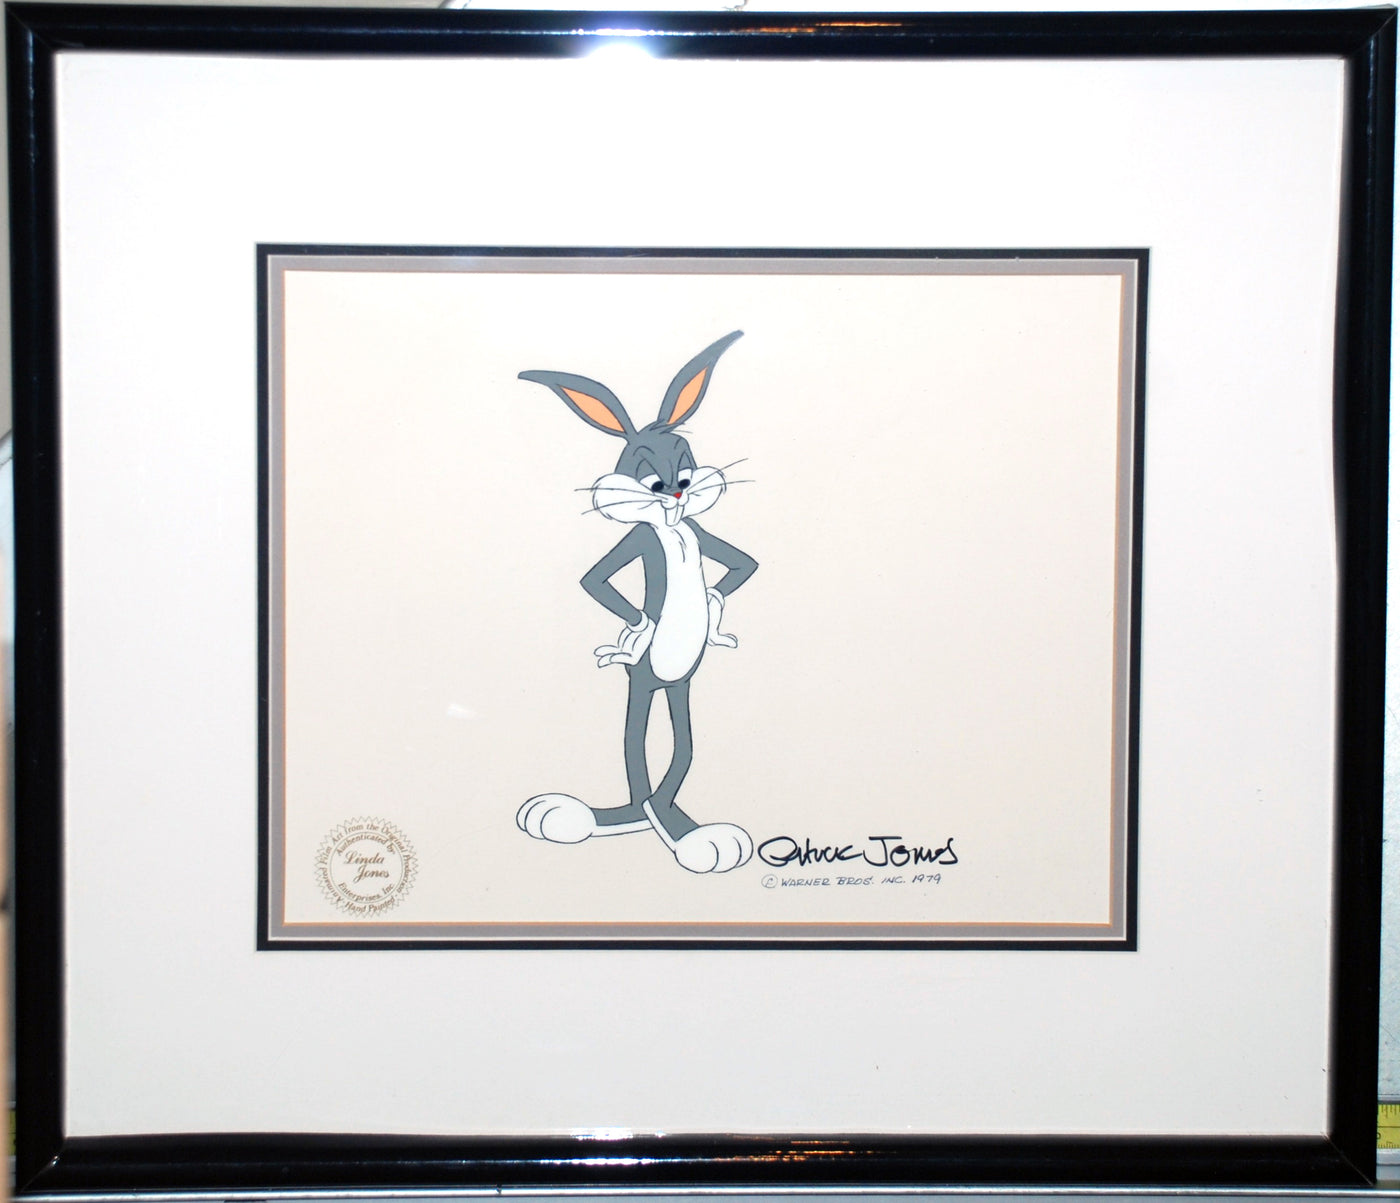 Original Warner Brothers Production Cel Featuring Bugs Bunny